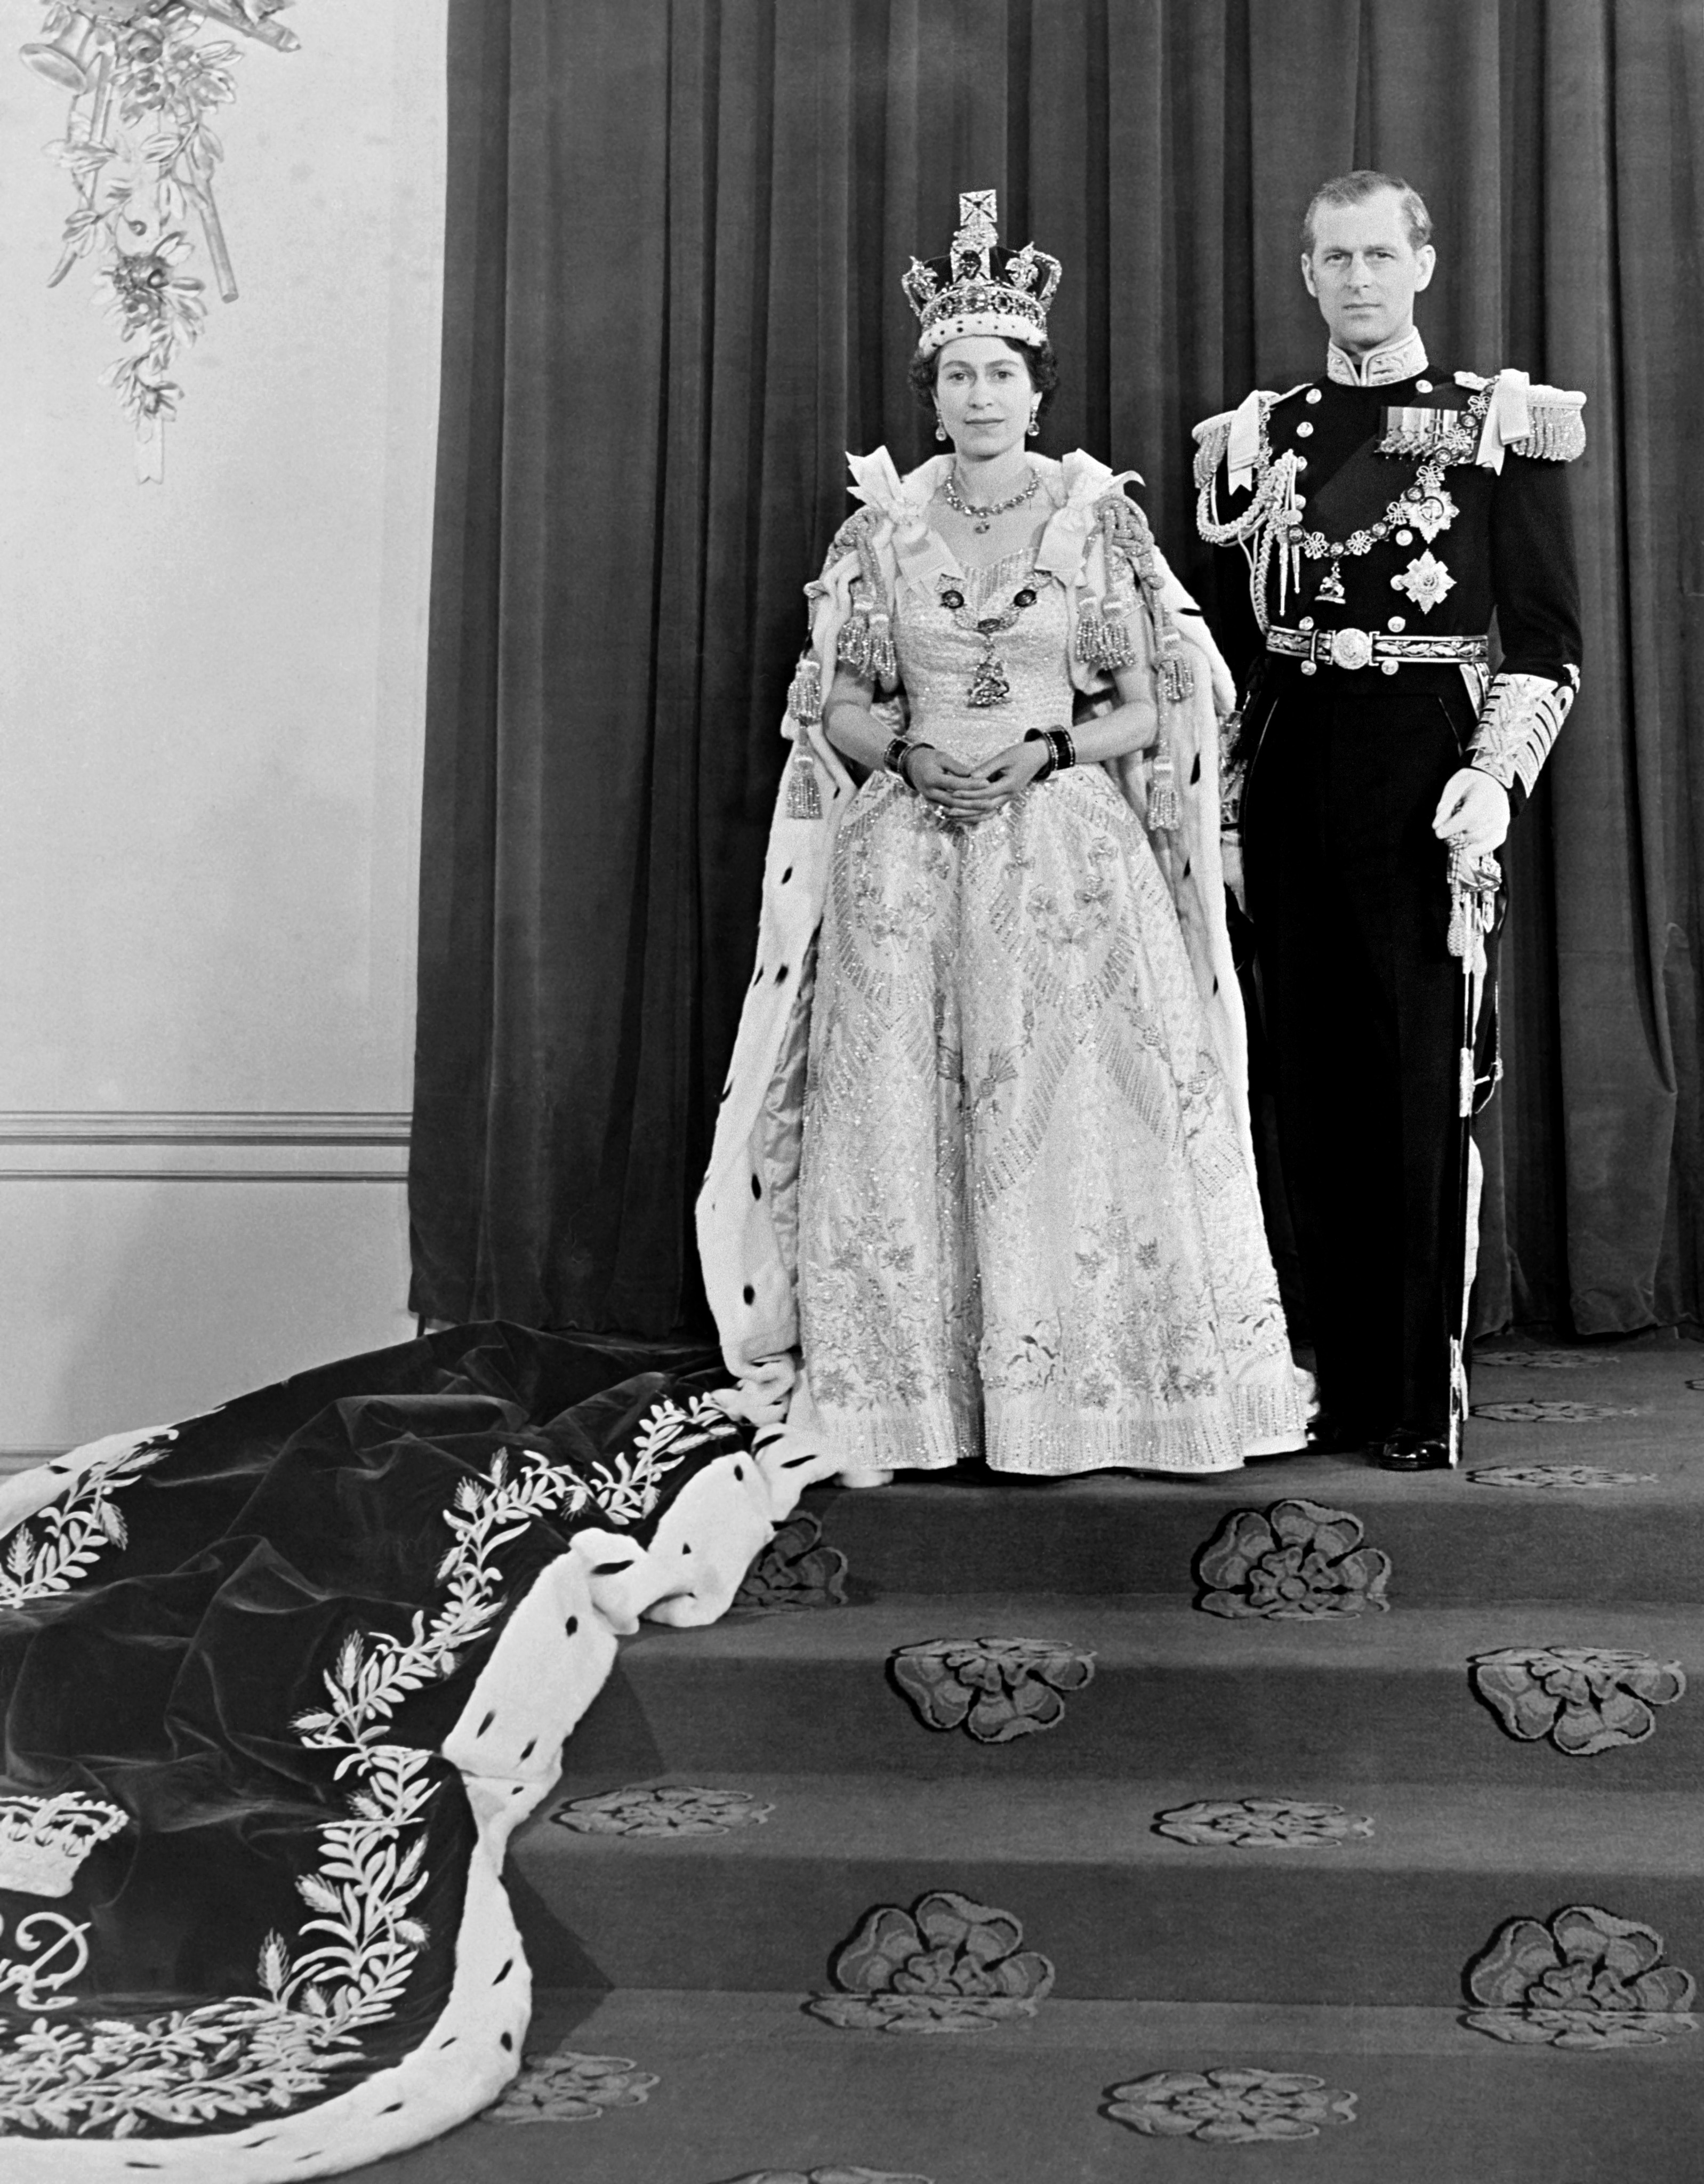 Queen Elizabeth II and her husband the Duke of Edinburgh at Buckingham Palace after her coronation